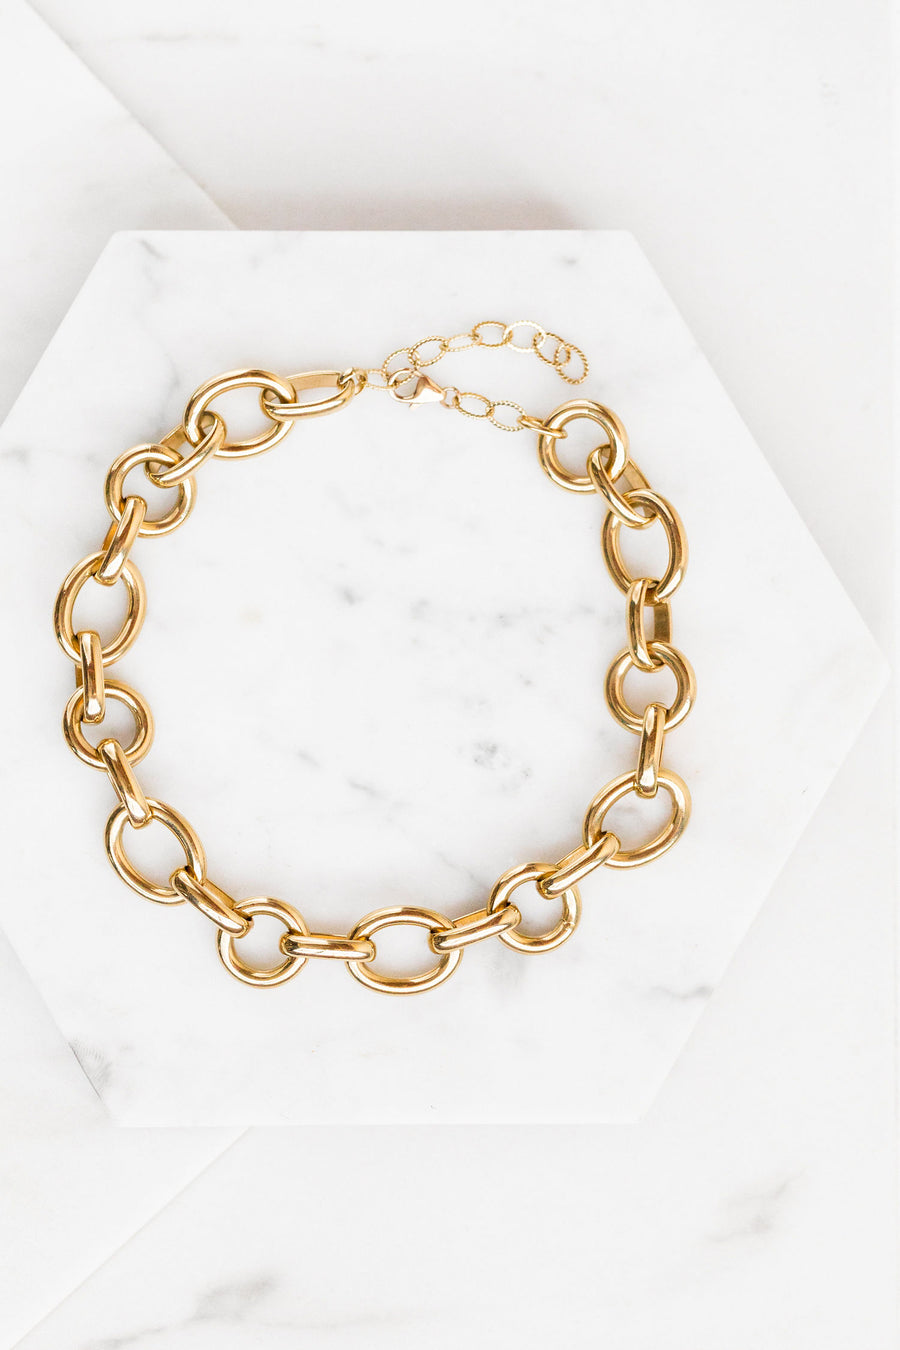 Find the perfect necklace you're looking for from Charme Silkiner! This beautiful 24K Gold Overlay Chain Necklace is simply perfect. Great for layering or wearing alone the Mirage Necklace is the perfect piece of unique jewelry that everyone should own.